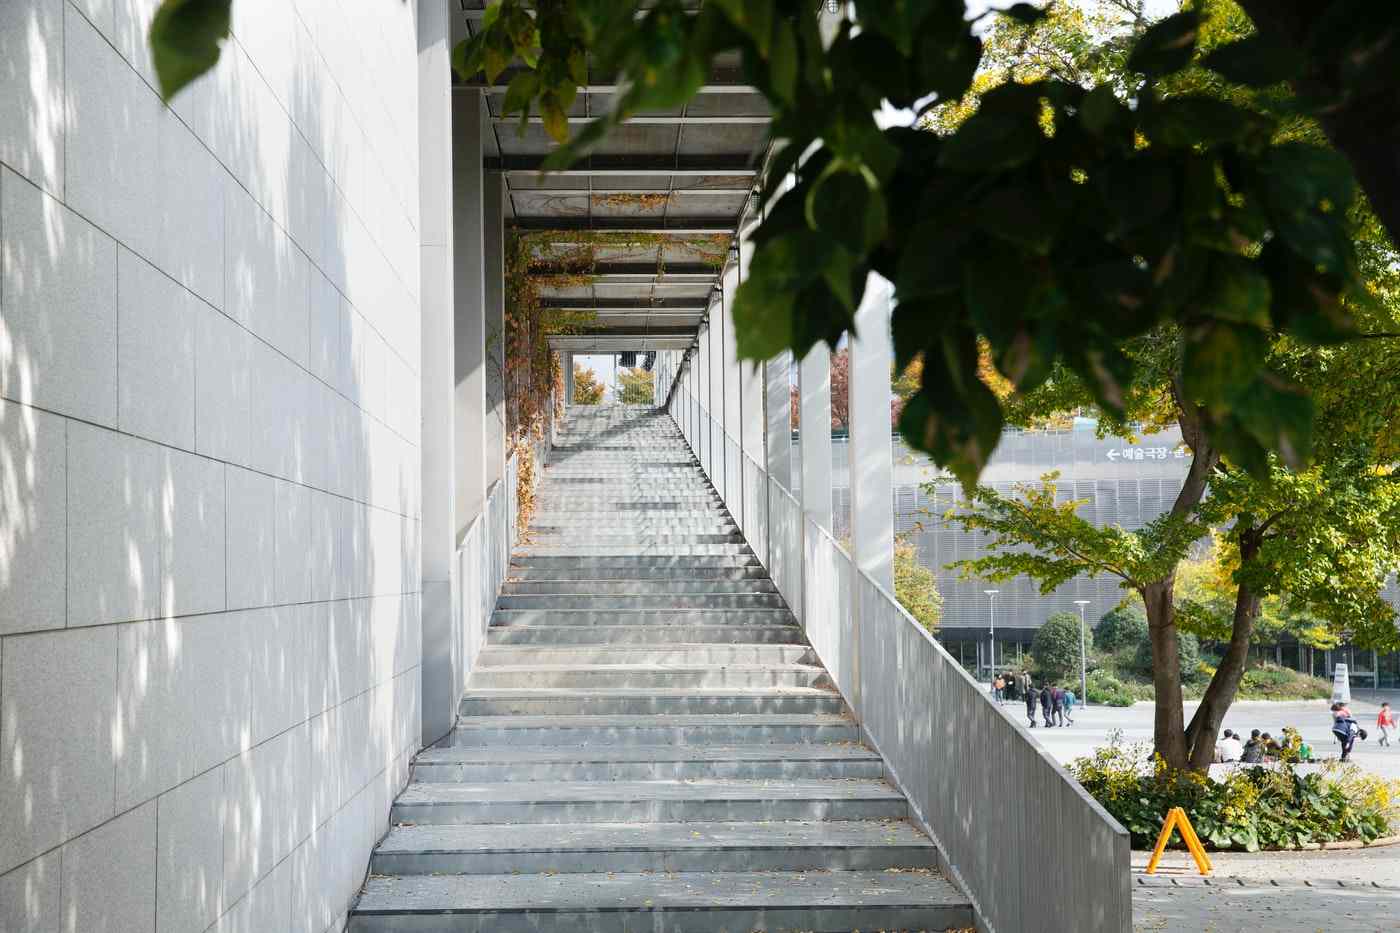 concrete stairs by tree - how to reduce embodied carbon in construction